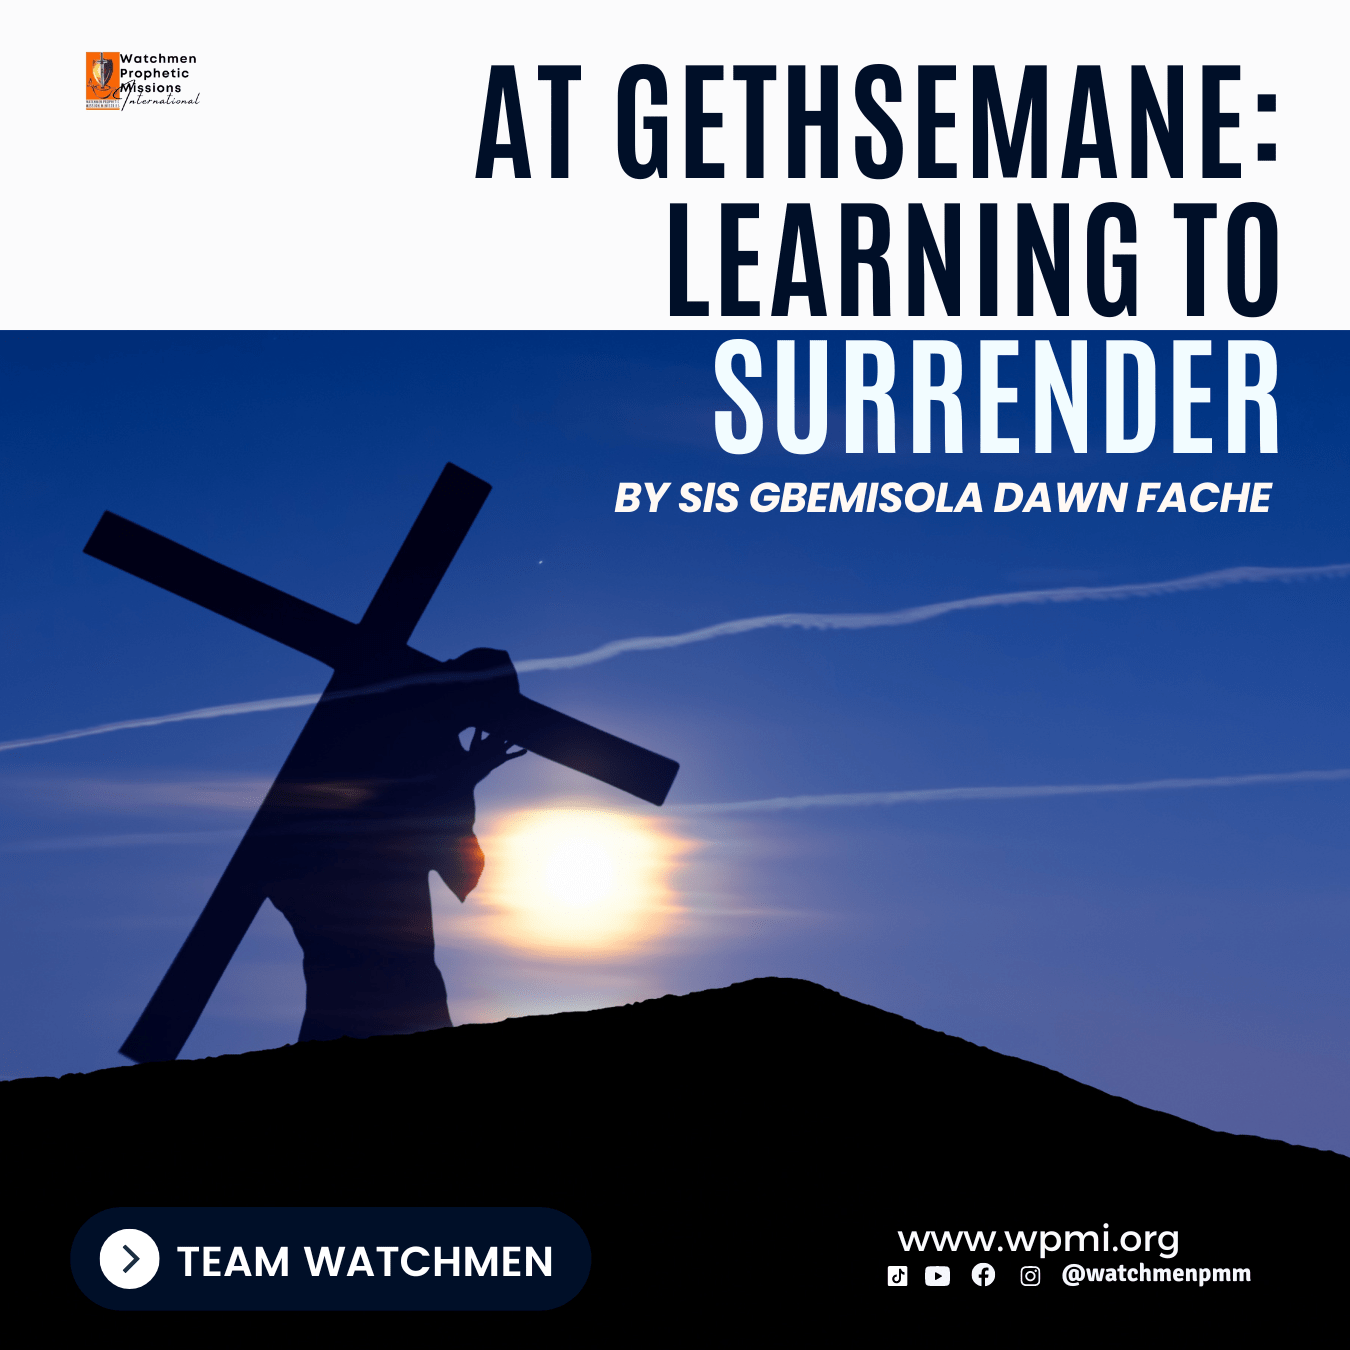 “At Gethsemane: Learning to Surrender” by Sis. Gbemisola Dawn Fache